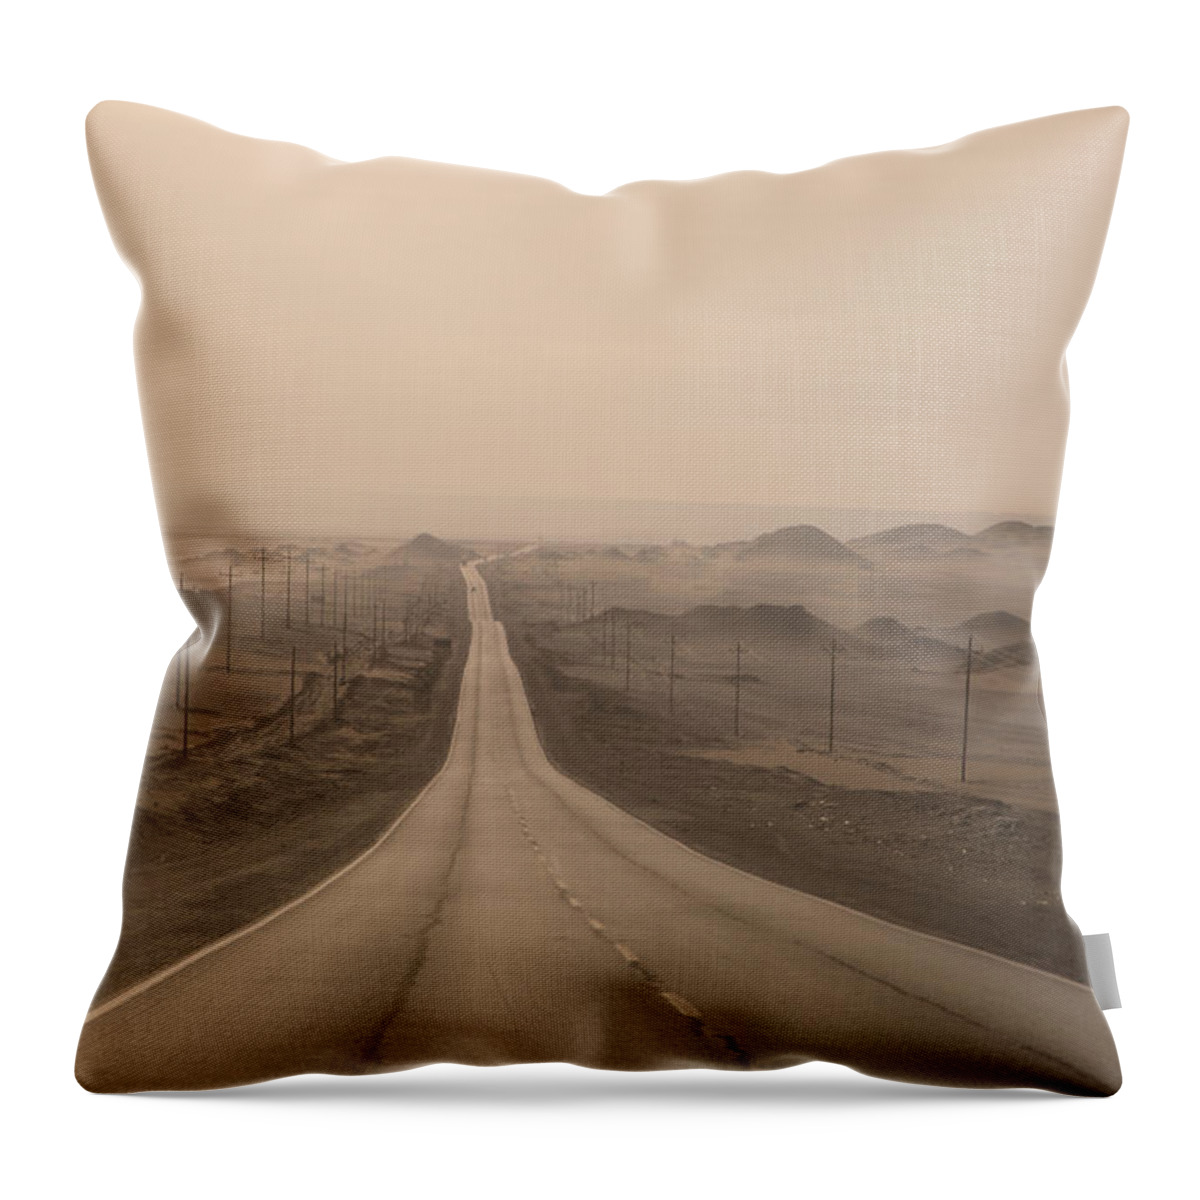 Tranquility Throw Pillow featuring the photograph A Seemingly Endless Road, Peru by Rosemary Calvert